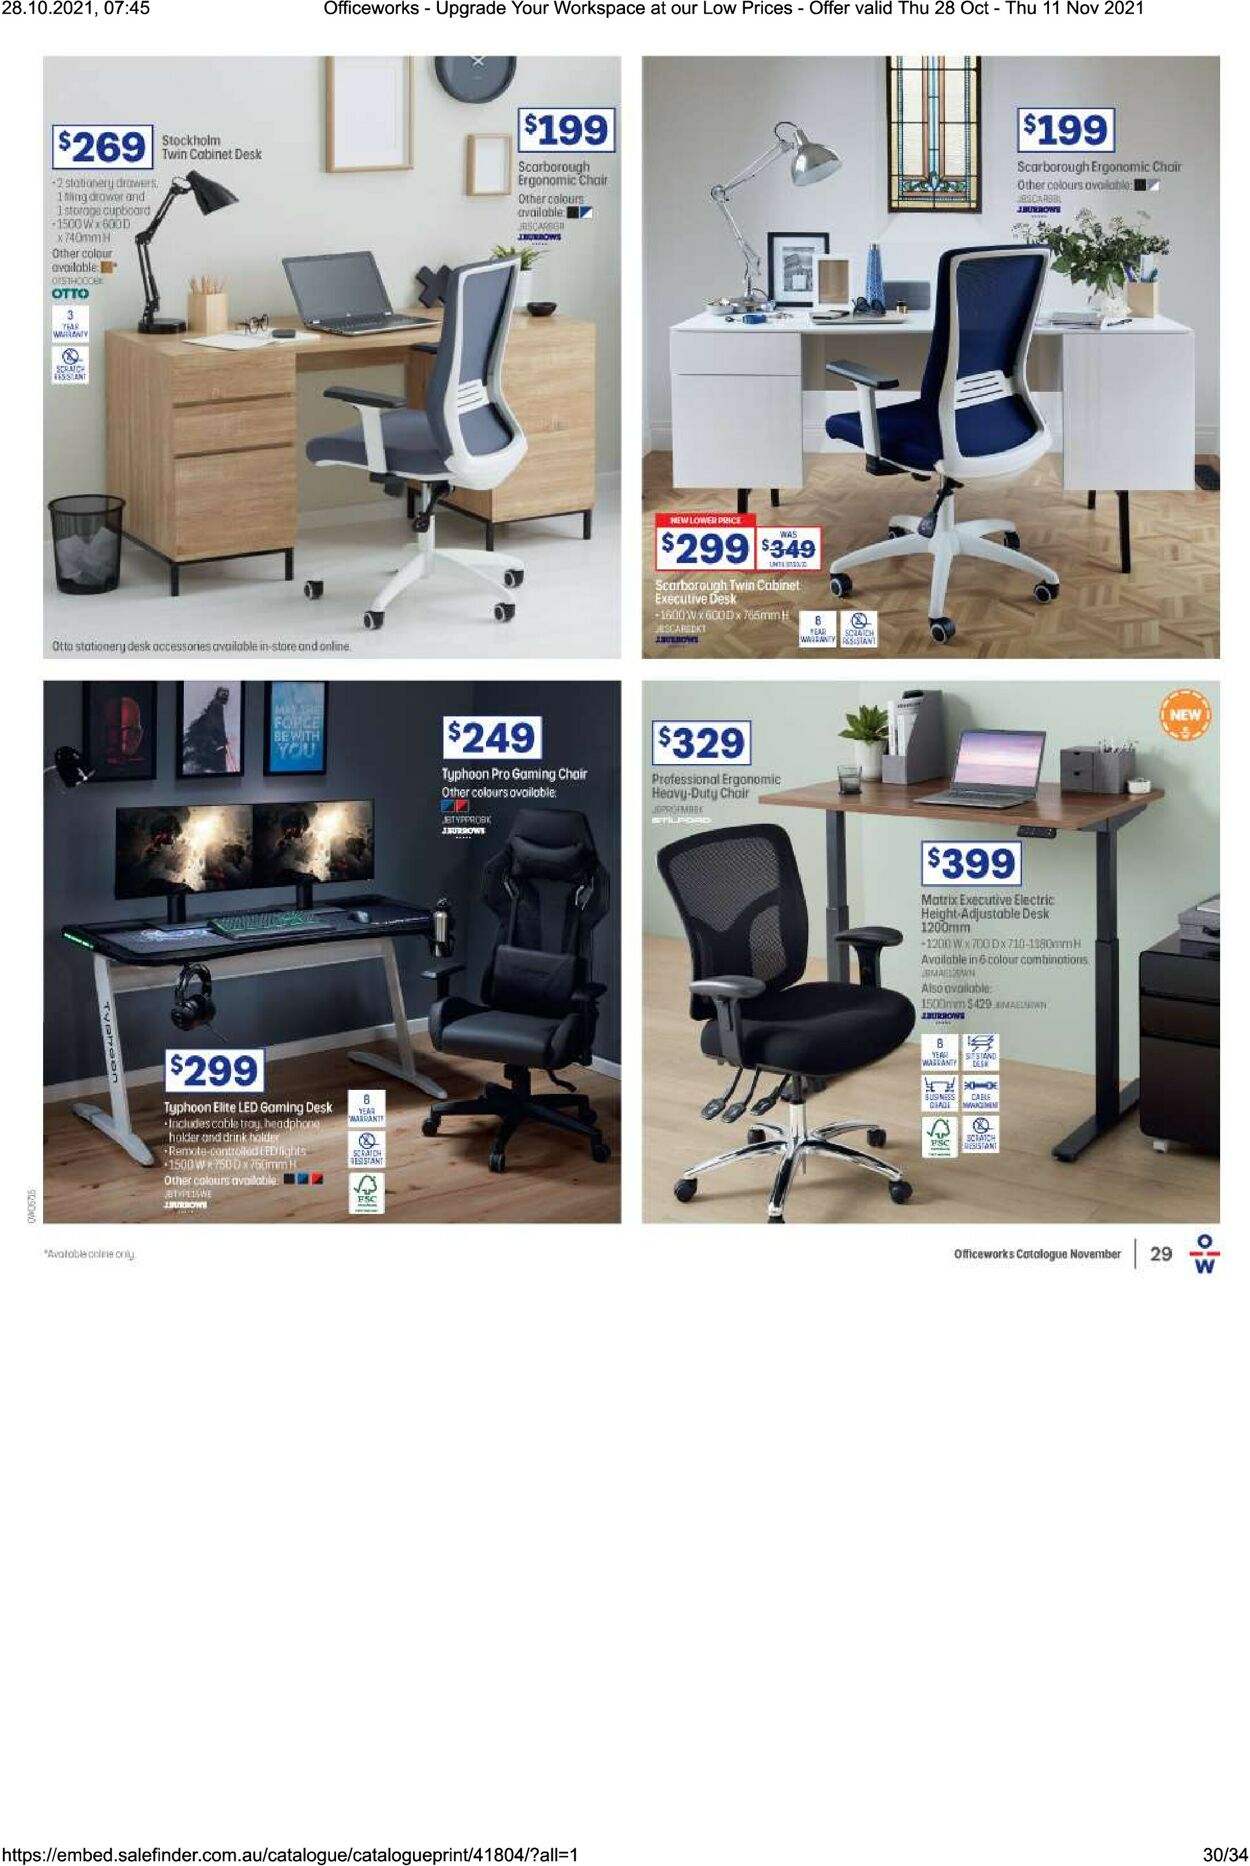 Catalogue Officeworks 28.10.2021 - 11.11.2021